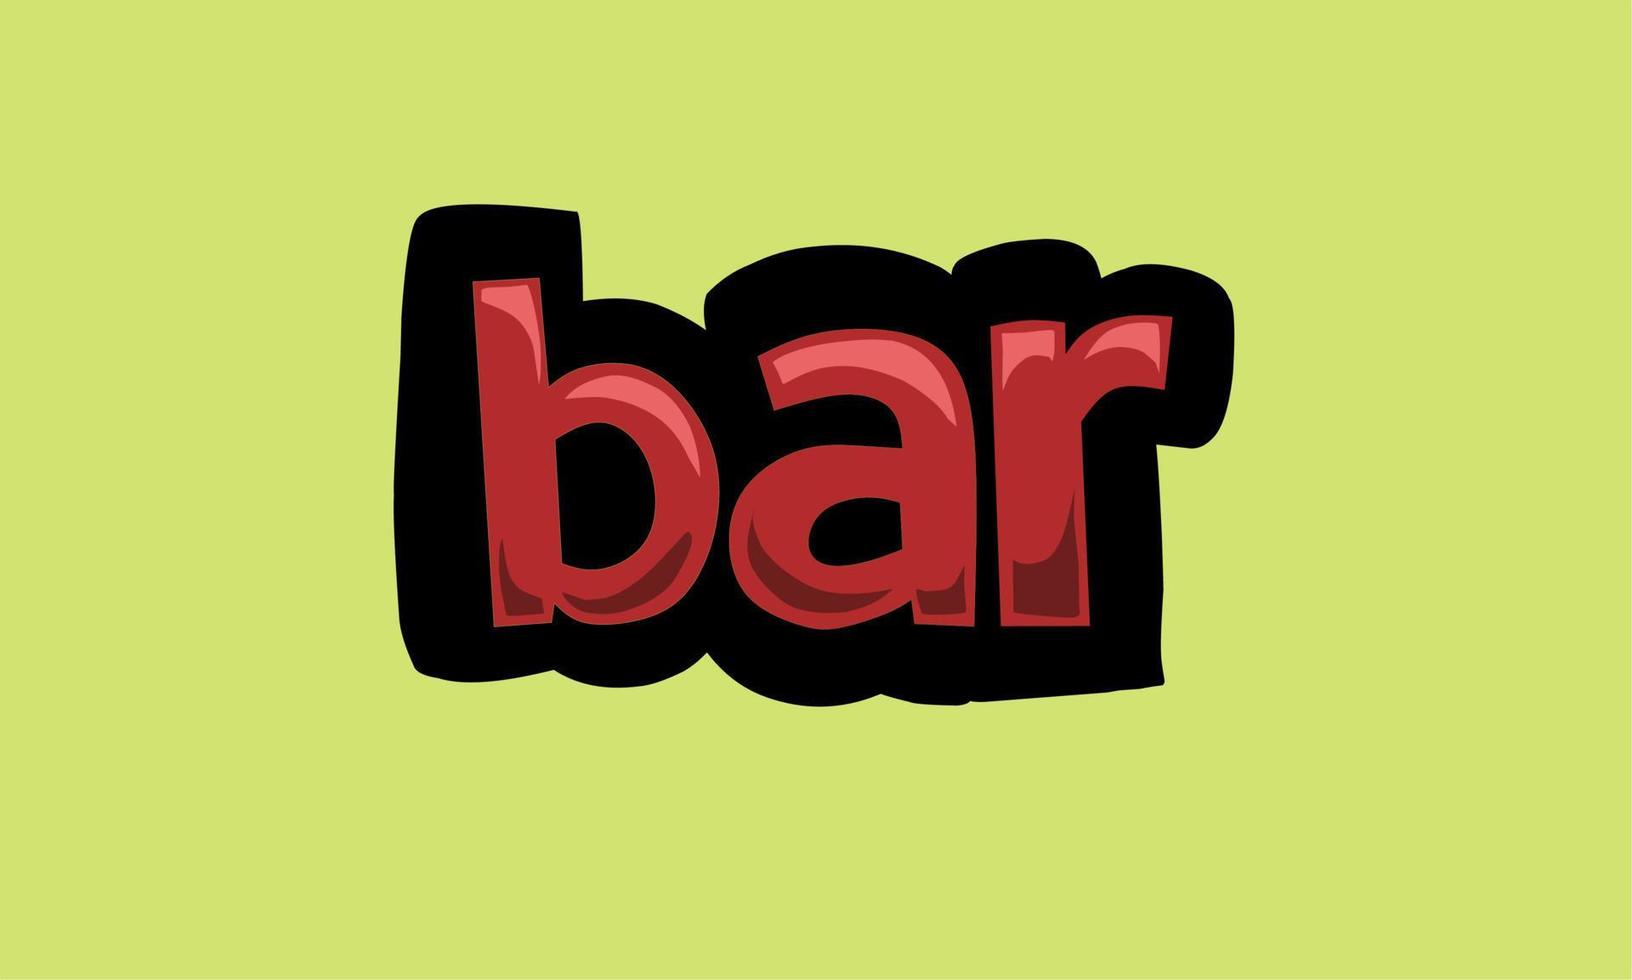 bar writing vector design on a green background